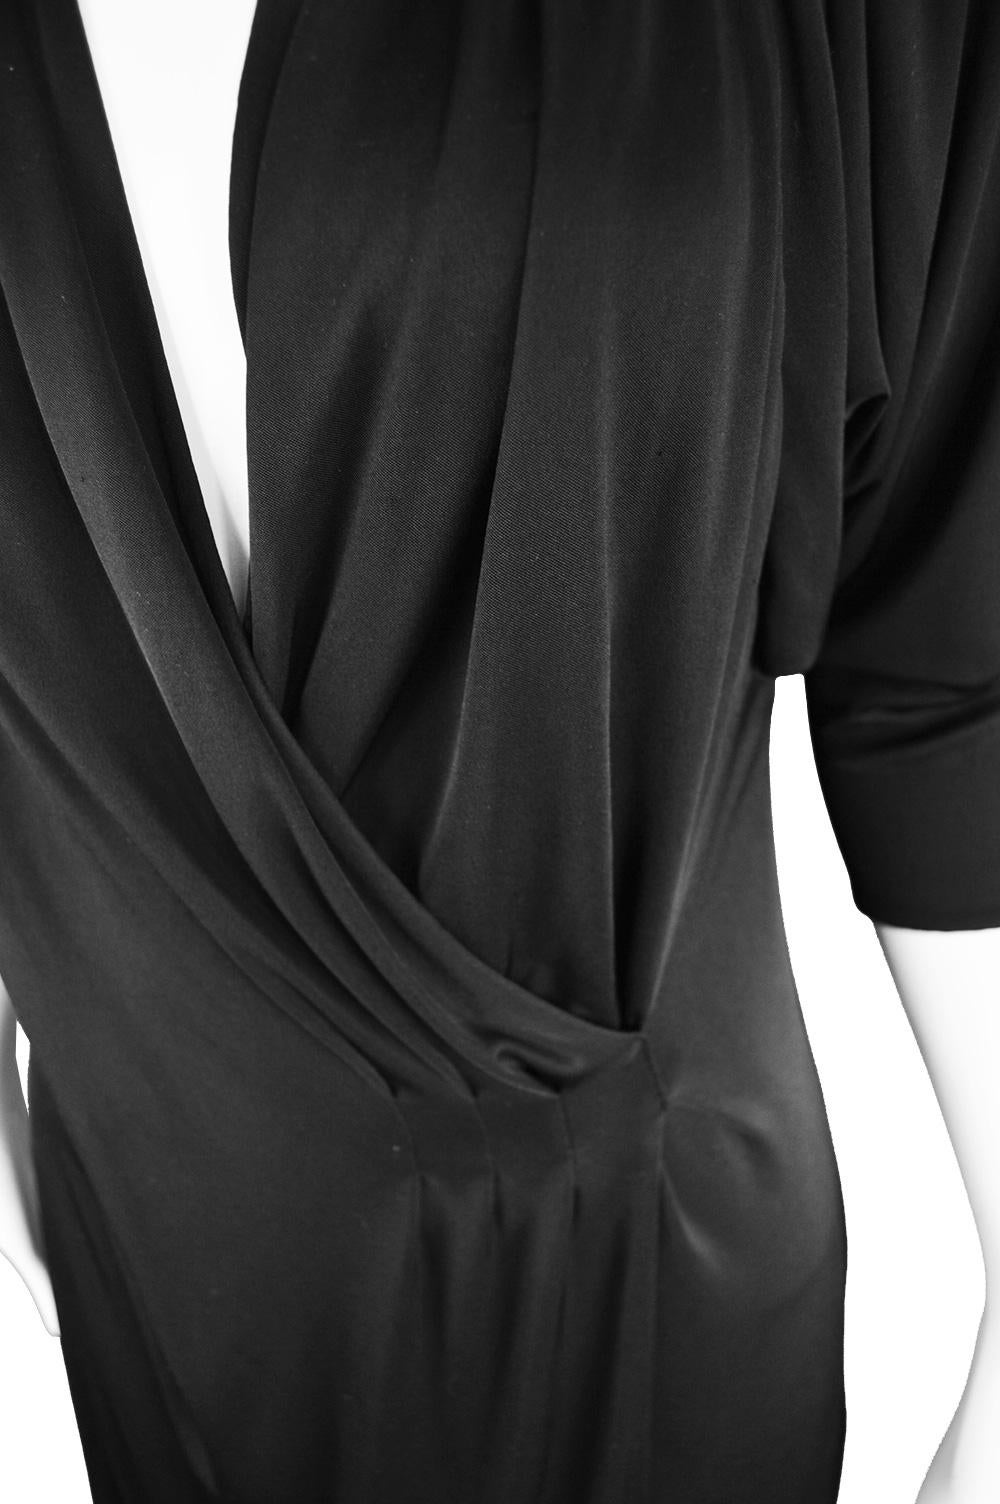 Women's Gianni Versace Couture Black Jersey Batwing Vintage Dress, Spring 2001 For Sale